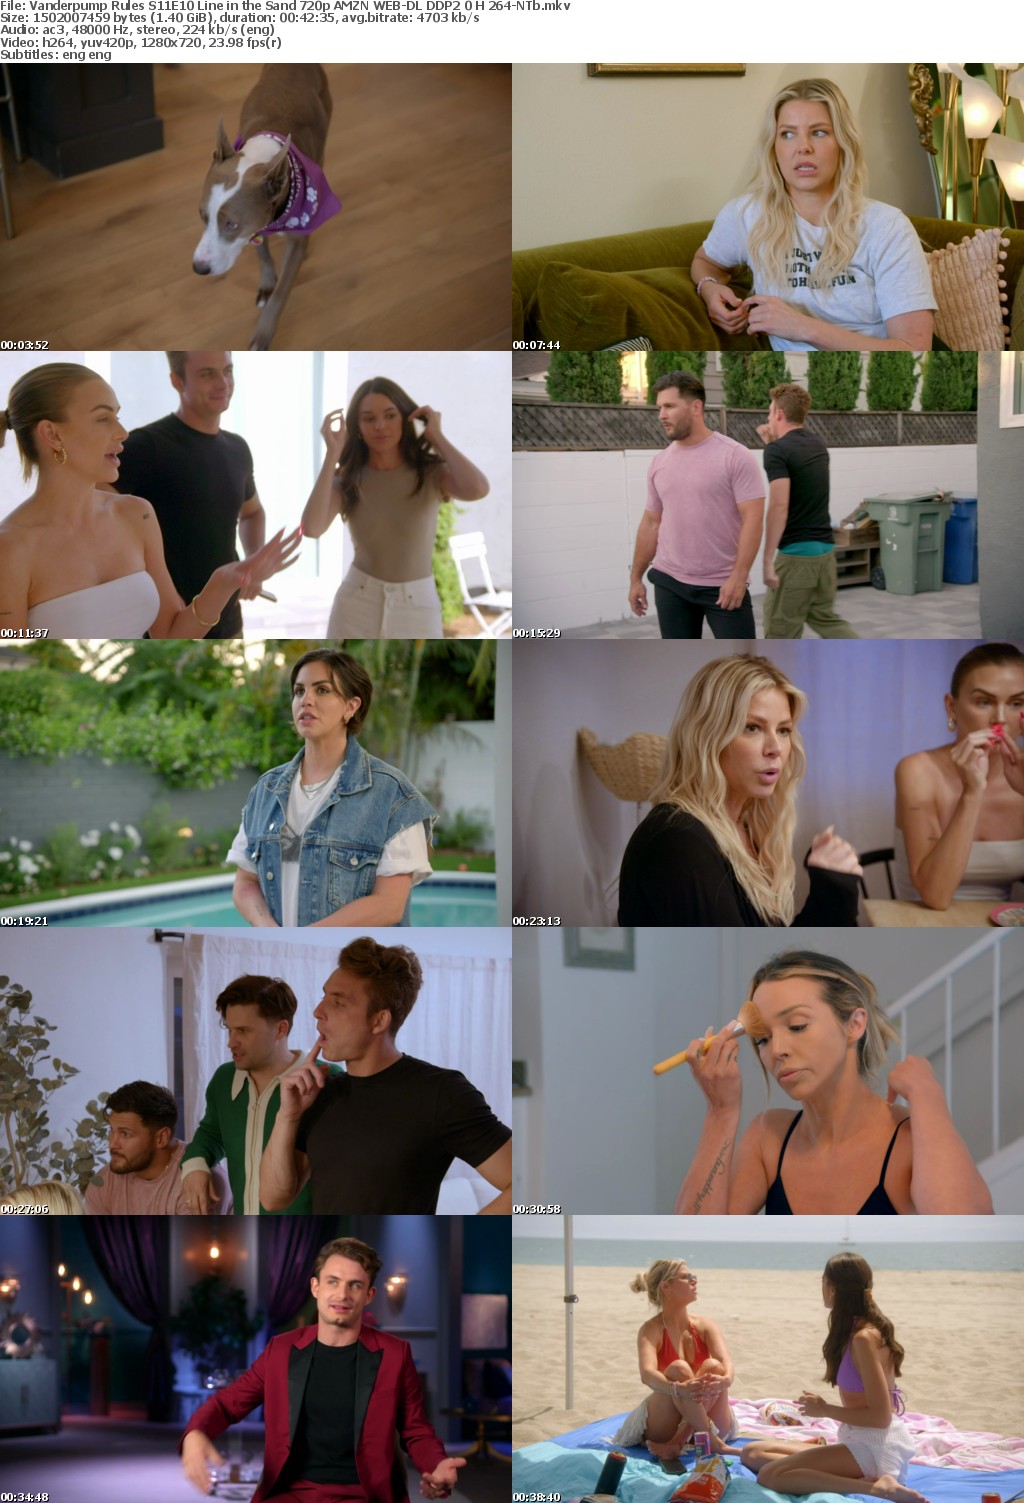 Vanderpump Rules S11E10 Line in the Sand 720p AMZN WEB-DL DDP2 0 H 264-NTb